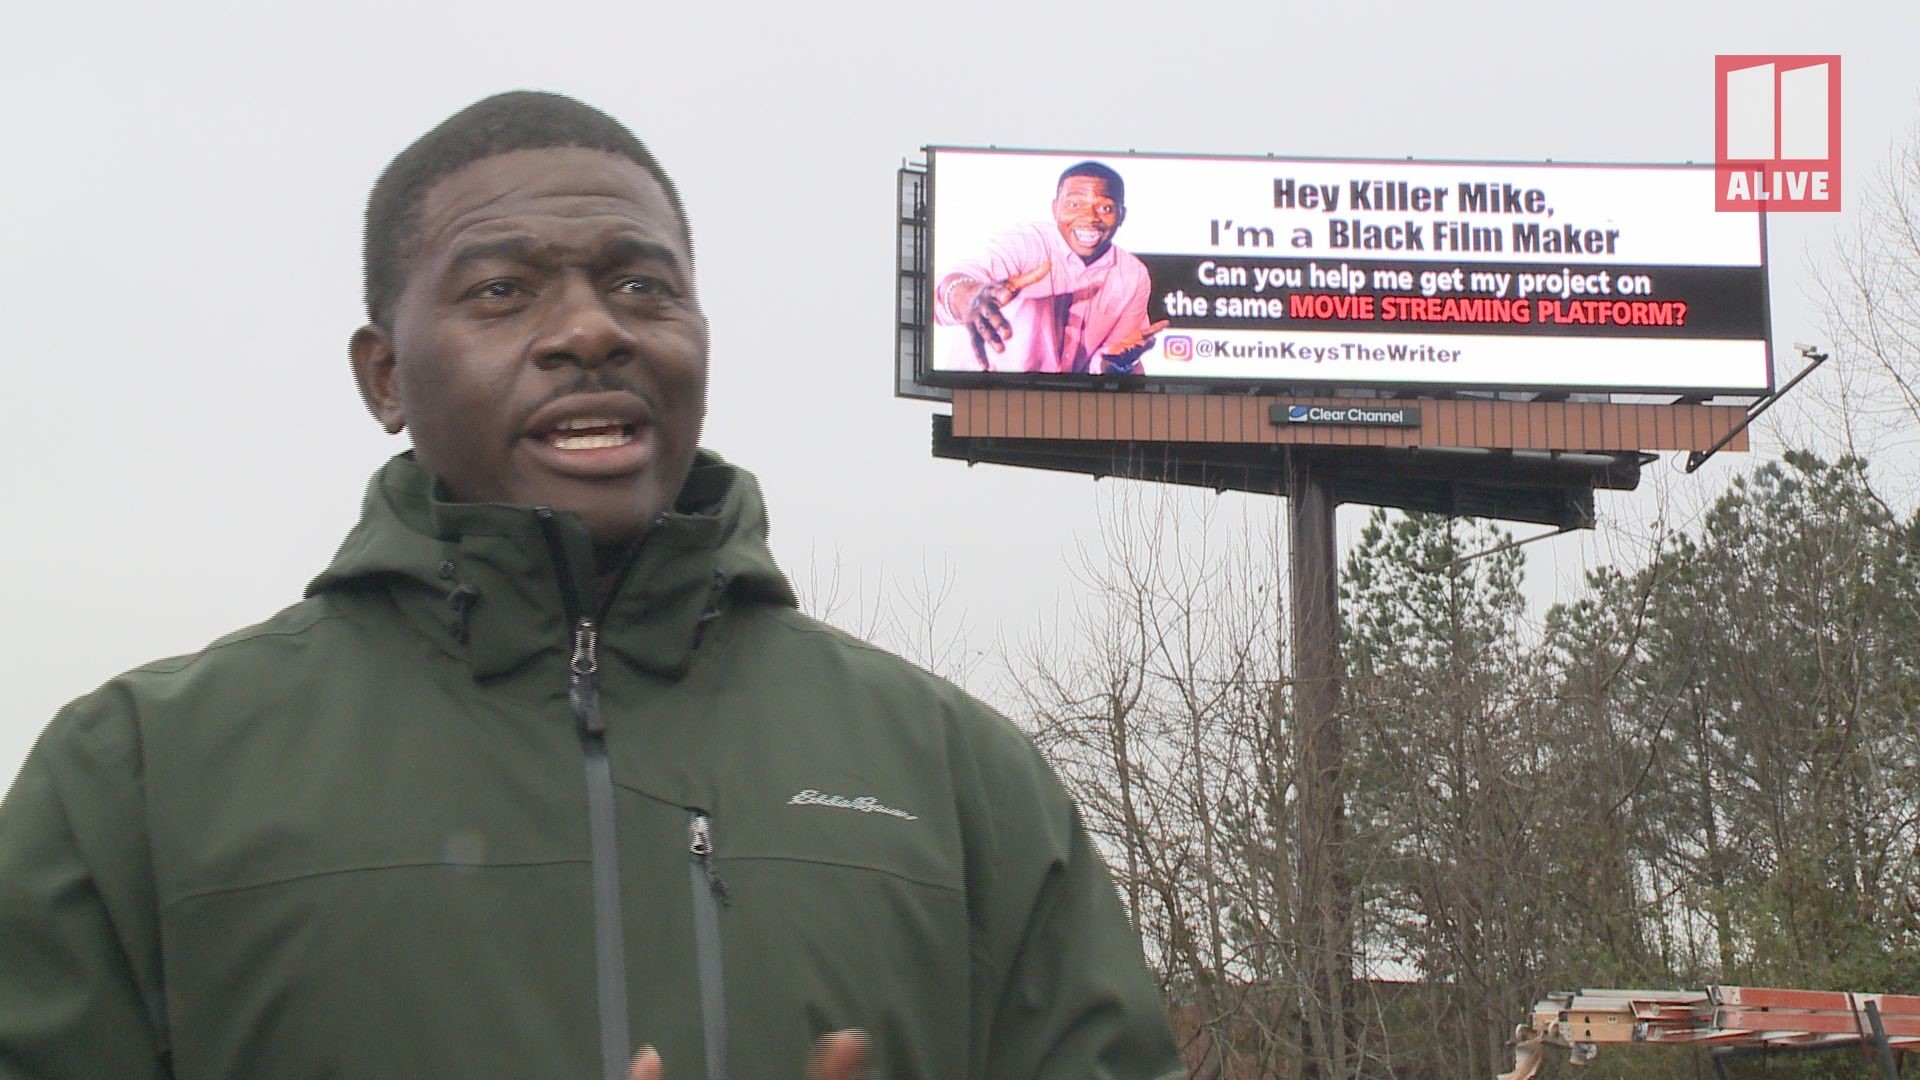 Killer Mike has put his support behind multiple local initiatives and small businesses. Now, Keys hopes the billboard will get his attention so they can work together.